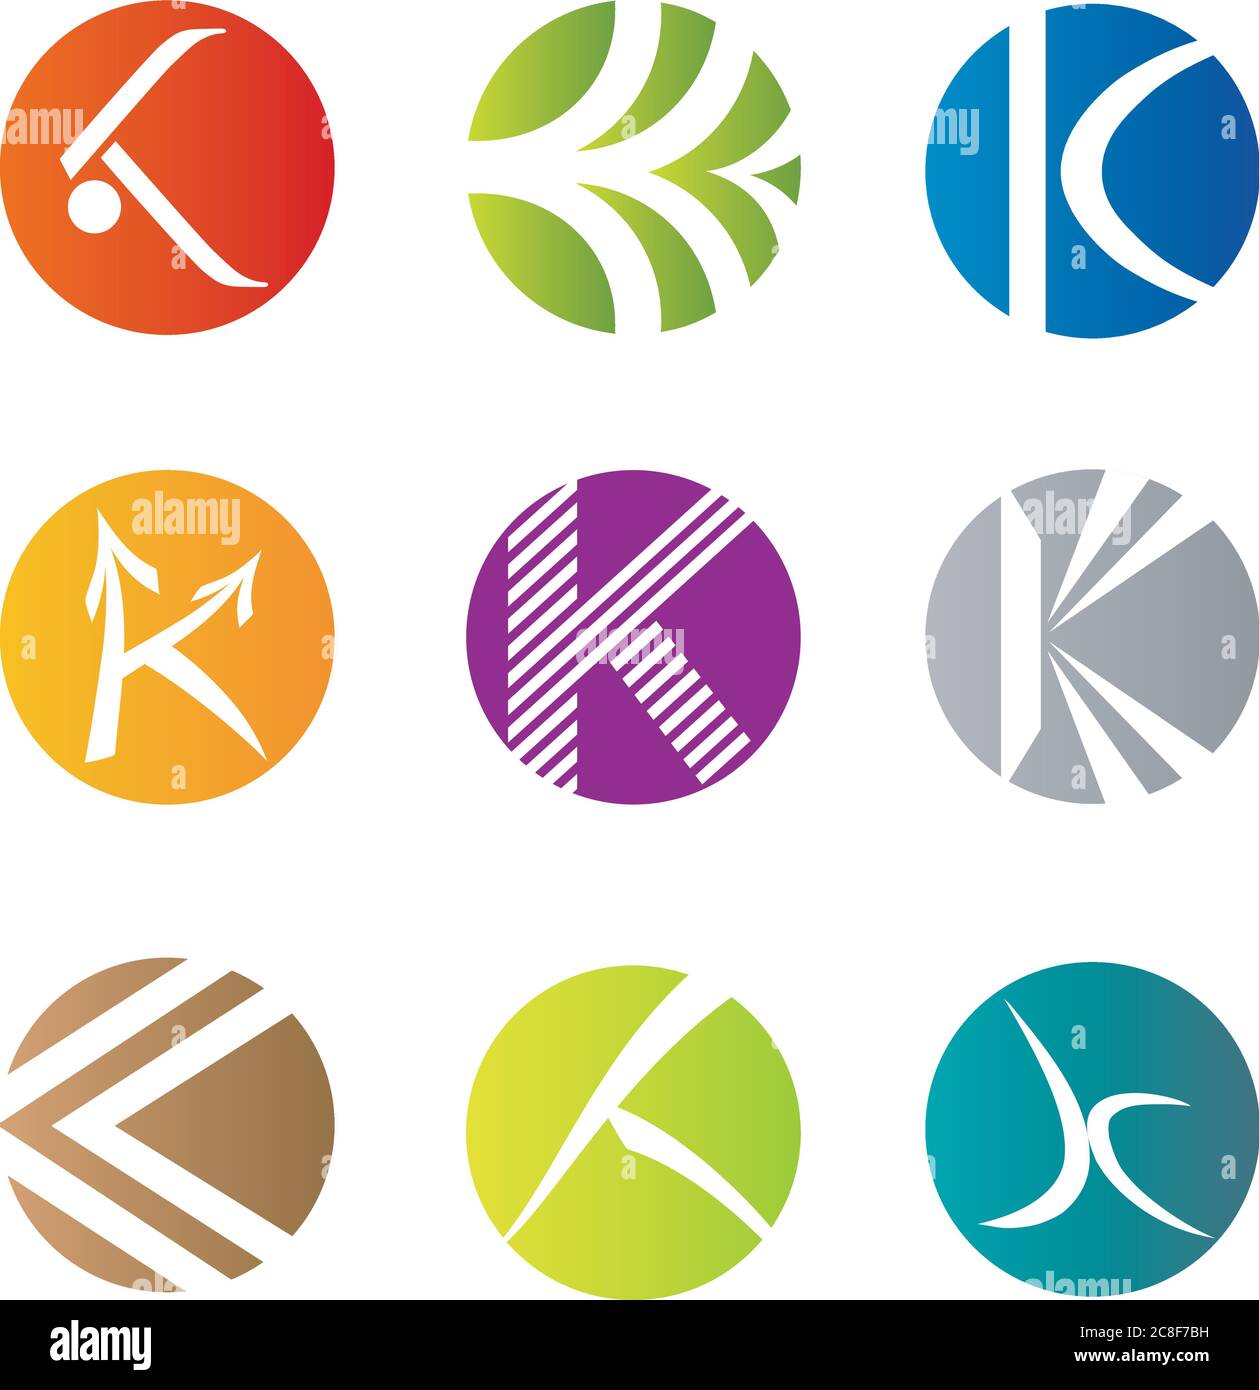 Set of nine Abstract Letter K Icons, Elements for Logo Design Stock Vector